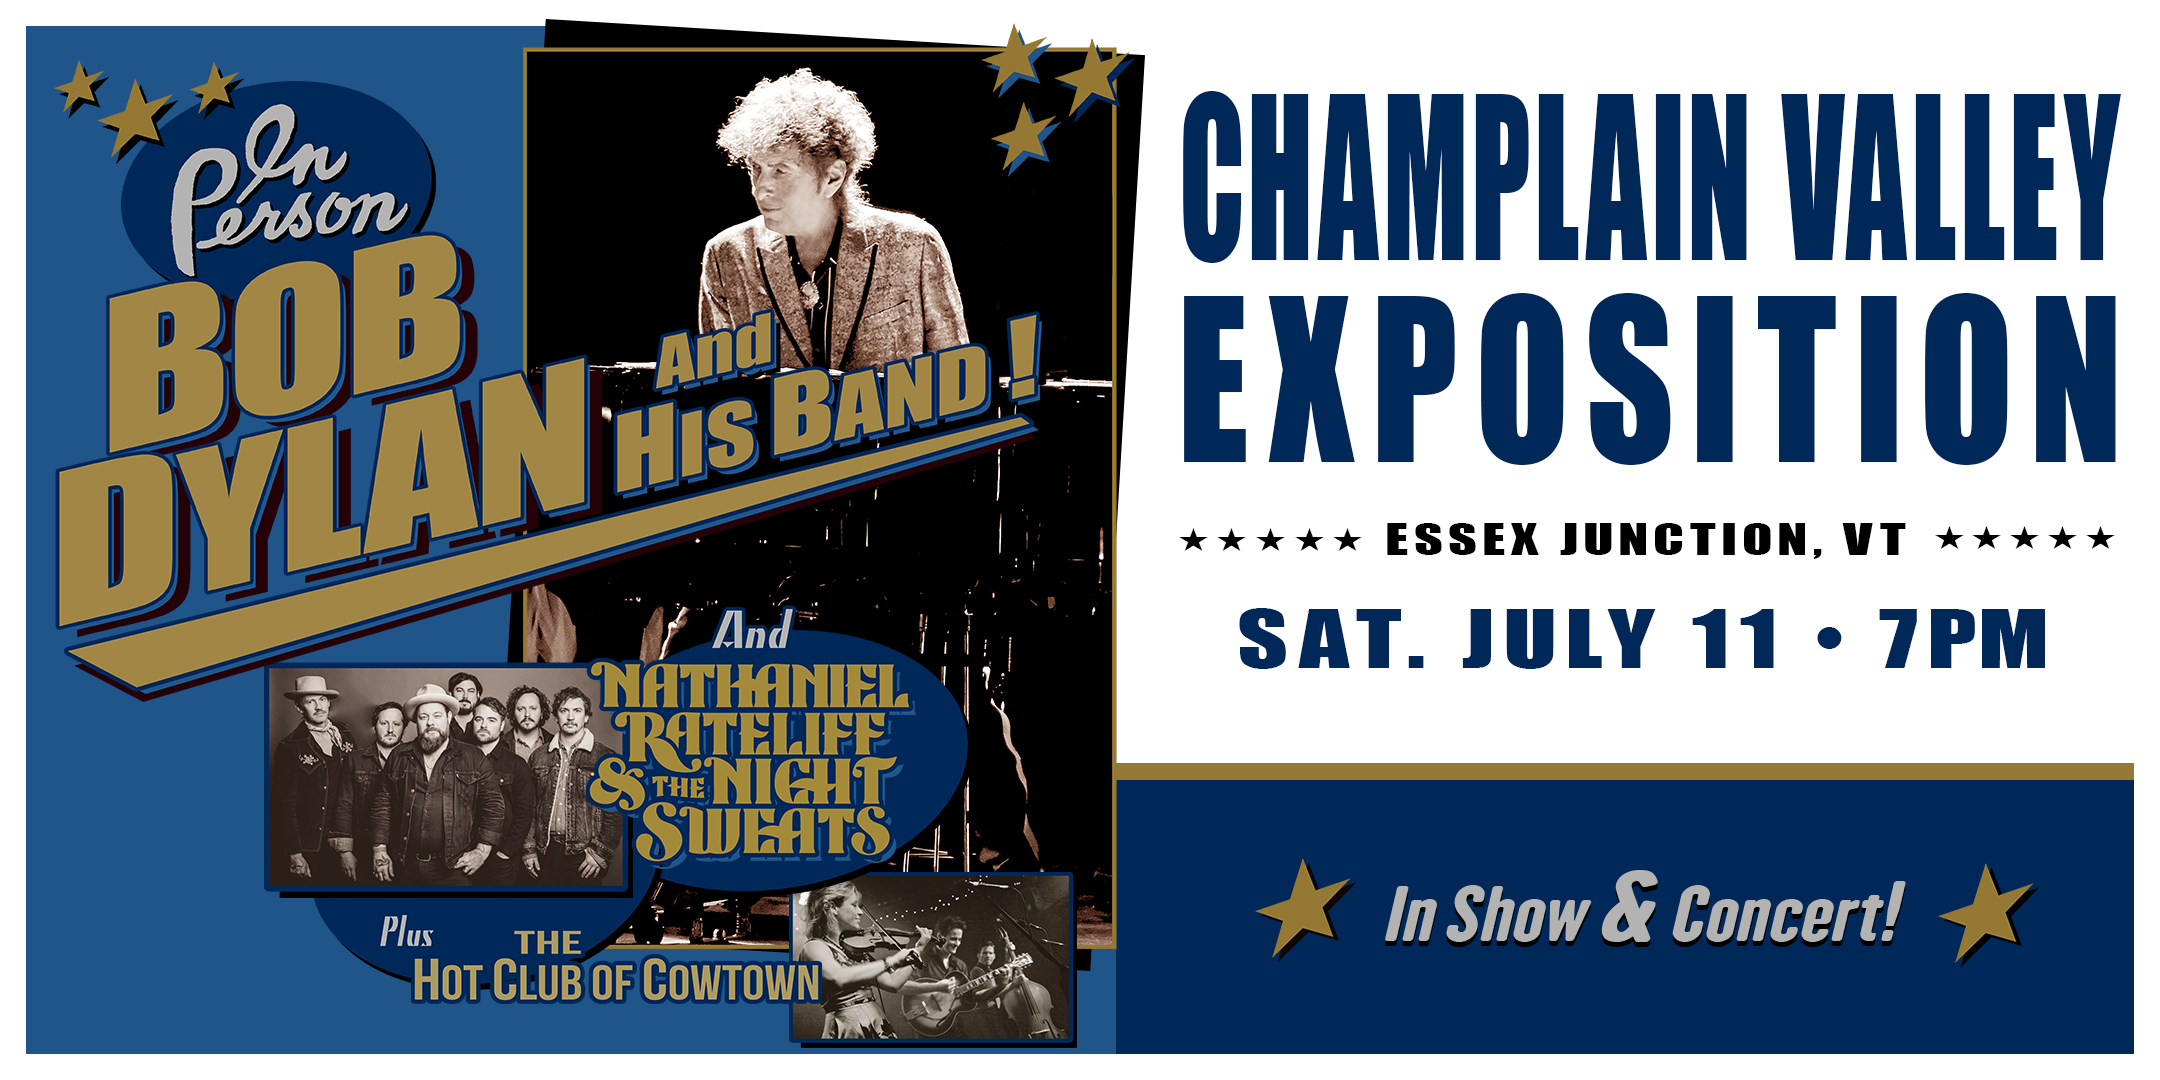 Bob Dylan and His Band 7.11.2020 at the Champlain Valley Expo